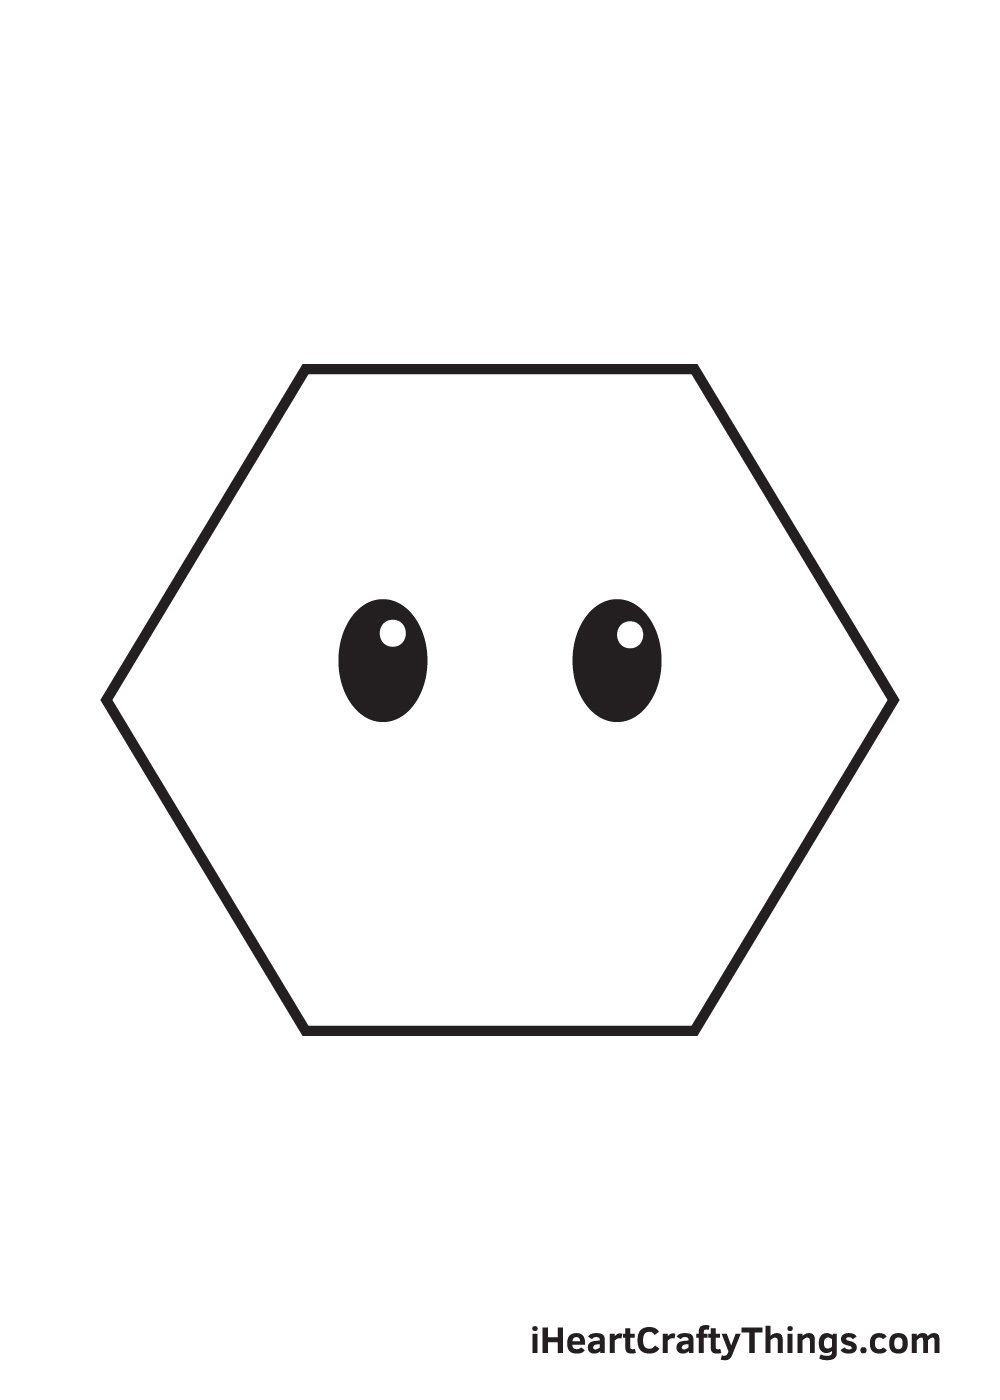 draw a perfect hexagon